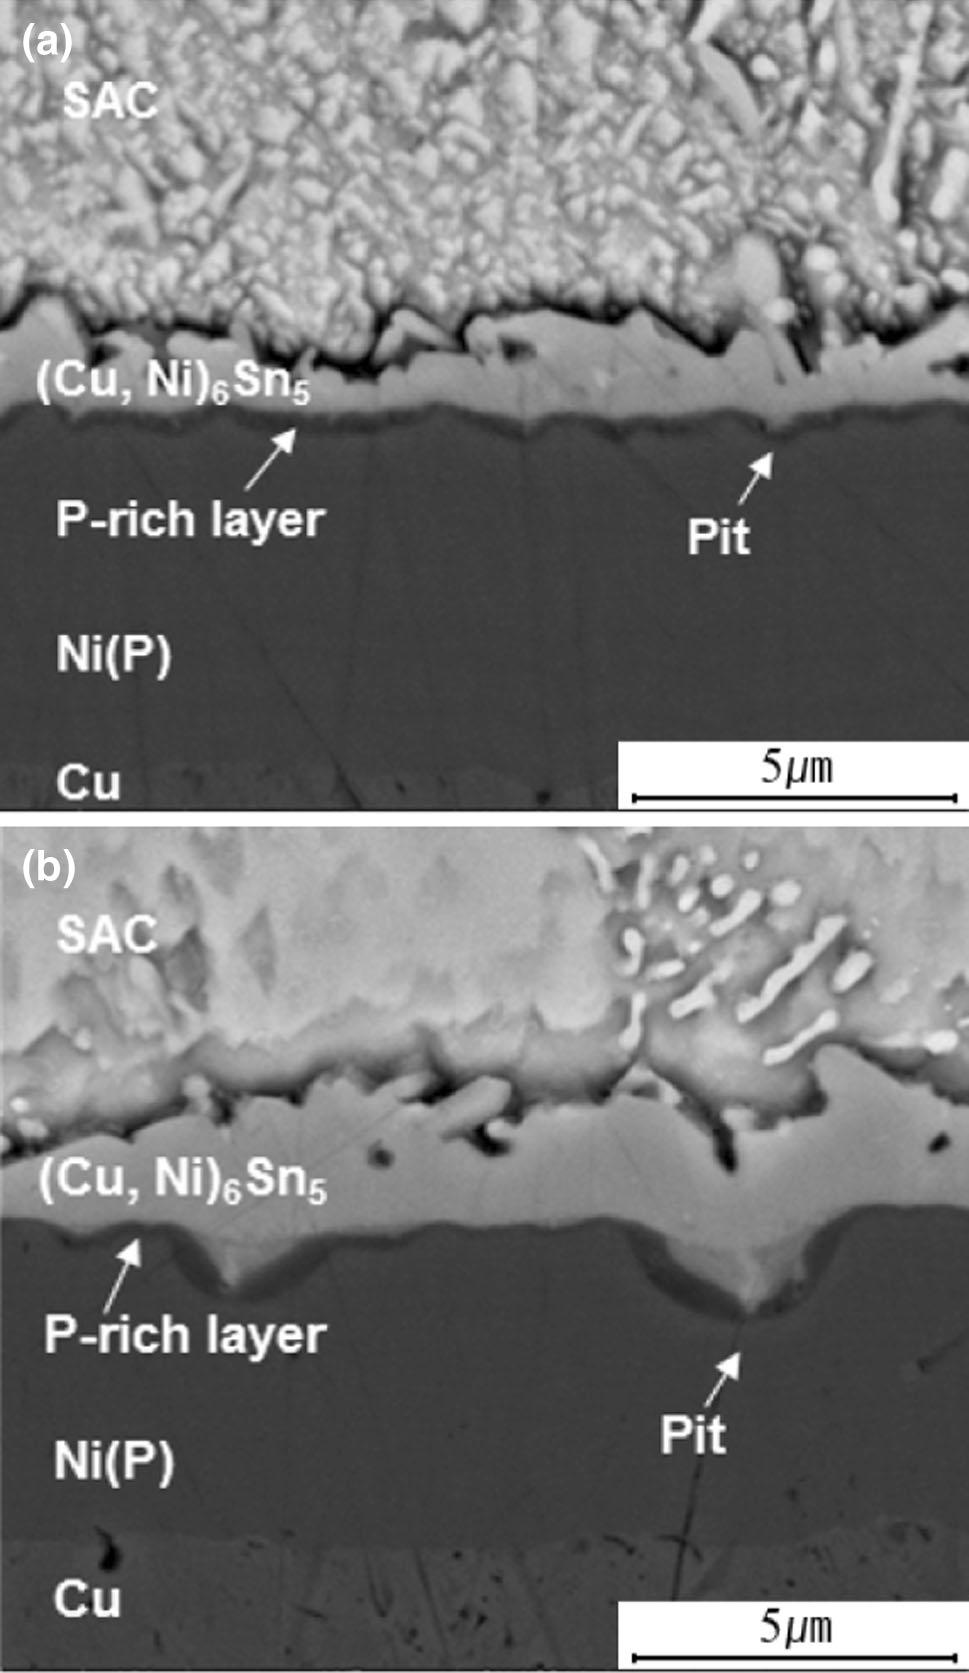 Effect of Bath Life of Ni(P) on the Brittle-Fracture Behavior of Sn-3.0Ag-0.5Cu/ENIG 4459 80 ENIG_0MTO ENIG_3MTO Shear strength (MPa) 70 60 50 40 30 0.0 0.5 1.0 1.5 2.0 Strain rate(m/s) Fig. 4. Effect of bath life of Ni(P) on high-speed shear (HSS) test result for SAC/ENIG.